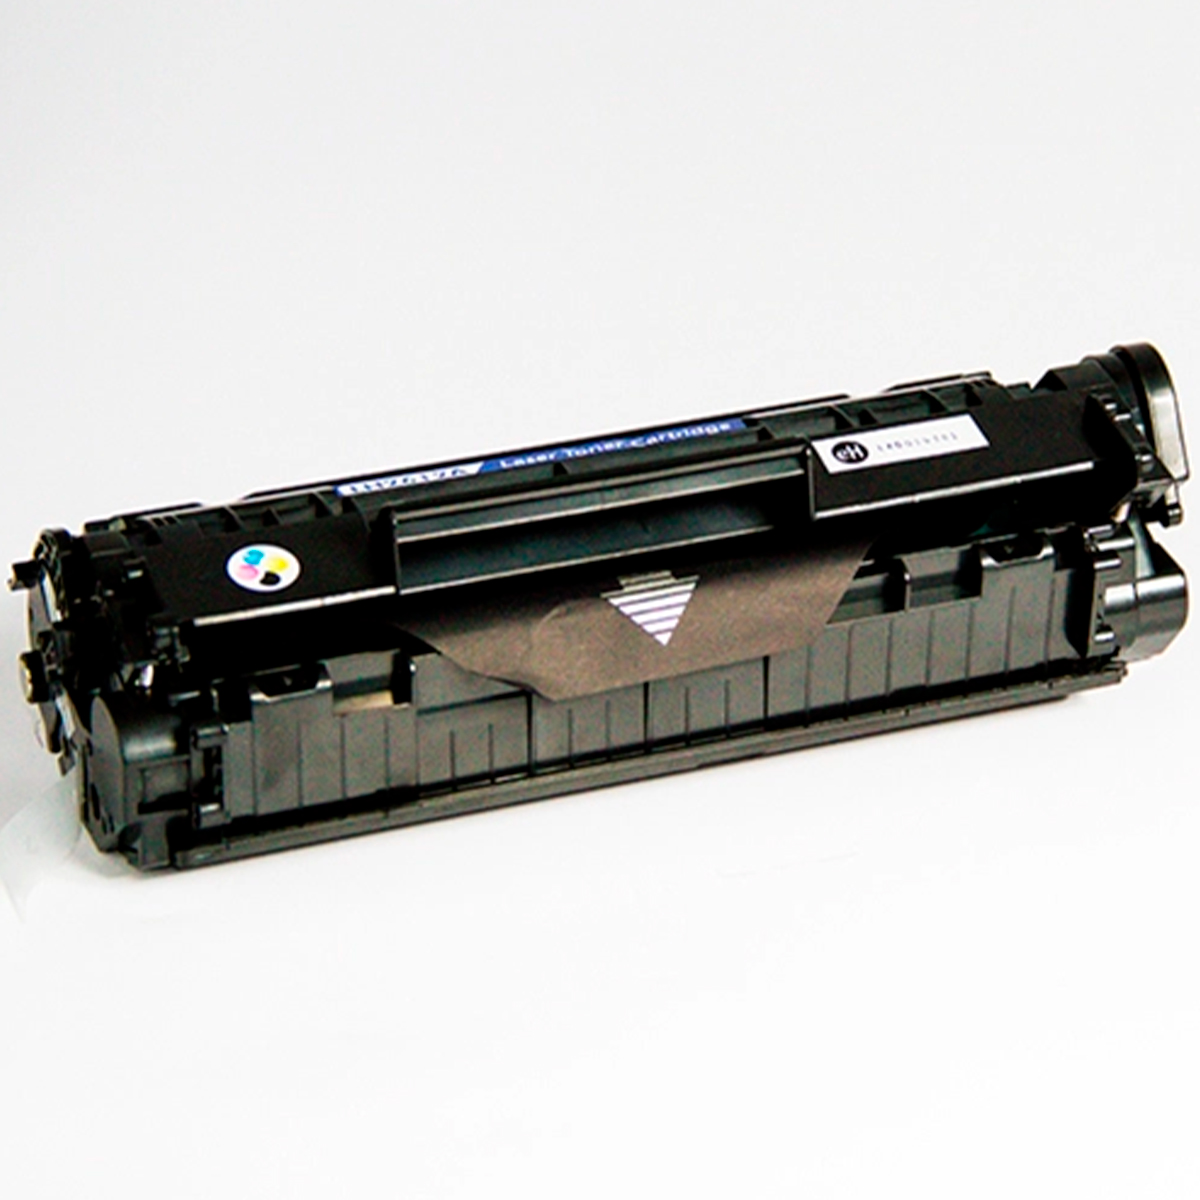 Toner compatível HP Q2612A - LHQ2612A - Para HP 1010, 1012, 1015, 1018, 1020, 1022, 3015, 3030, 3050, 3052, 1319, M1005, 1022N, 3050N, 3055N, 1319F, 3055NF, M1319F, 1022NW